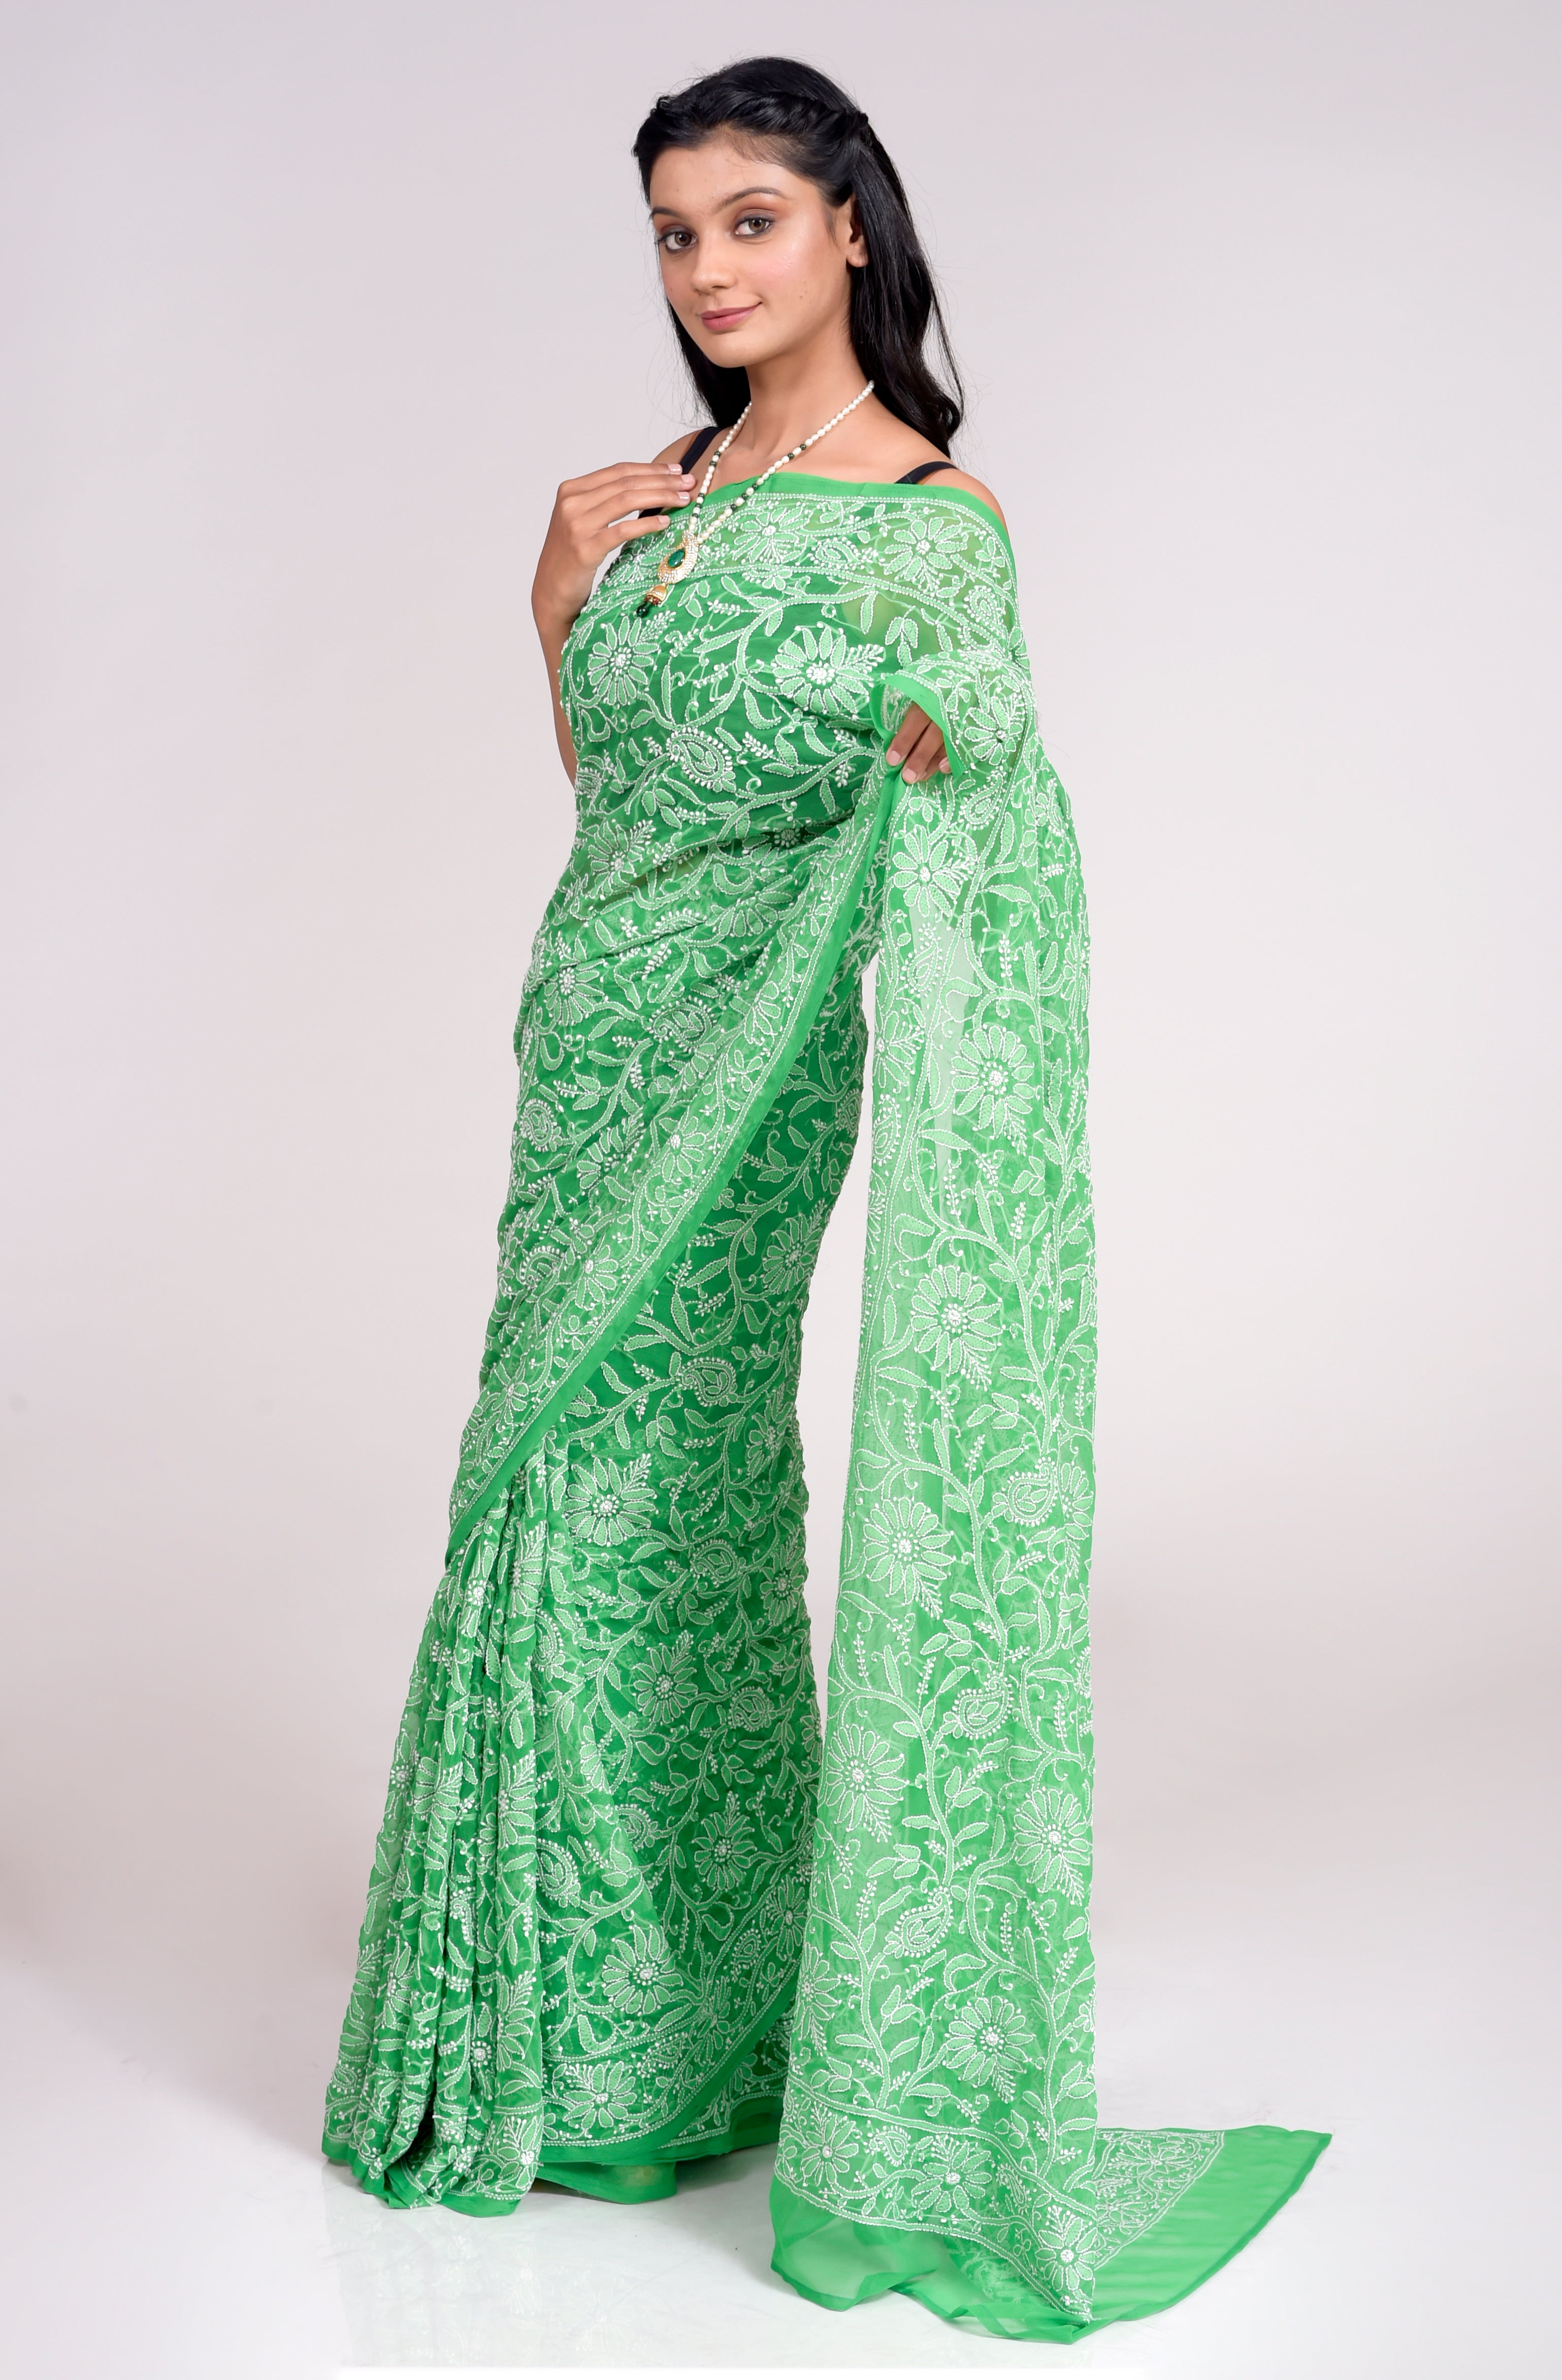 Lucknow Chikan Emporium Semi Georgette Green Colour Saree With Same Colour Blouse piece included. .